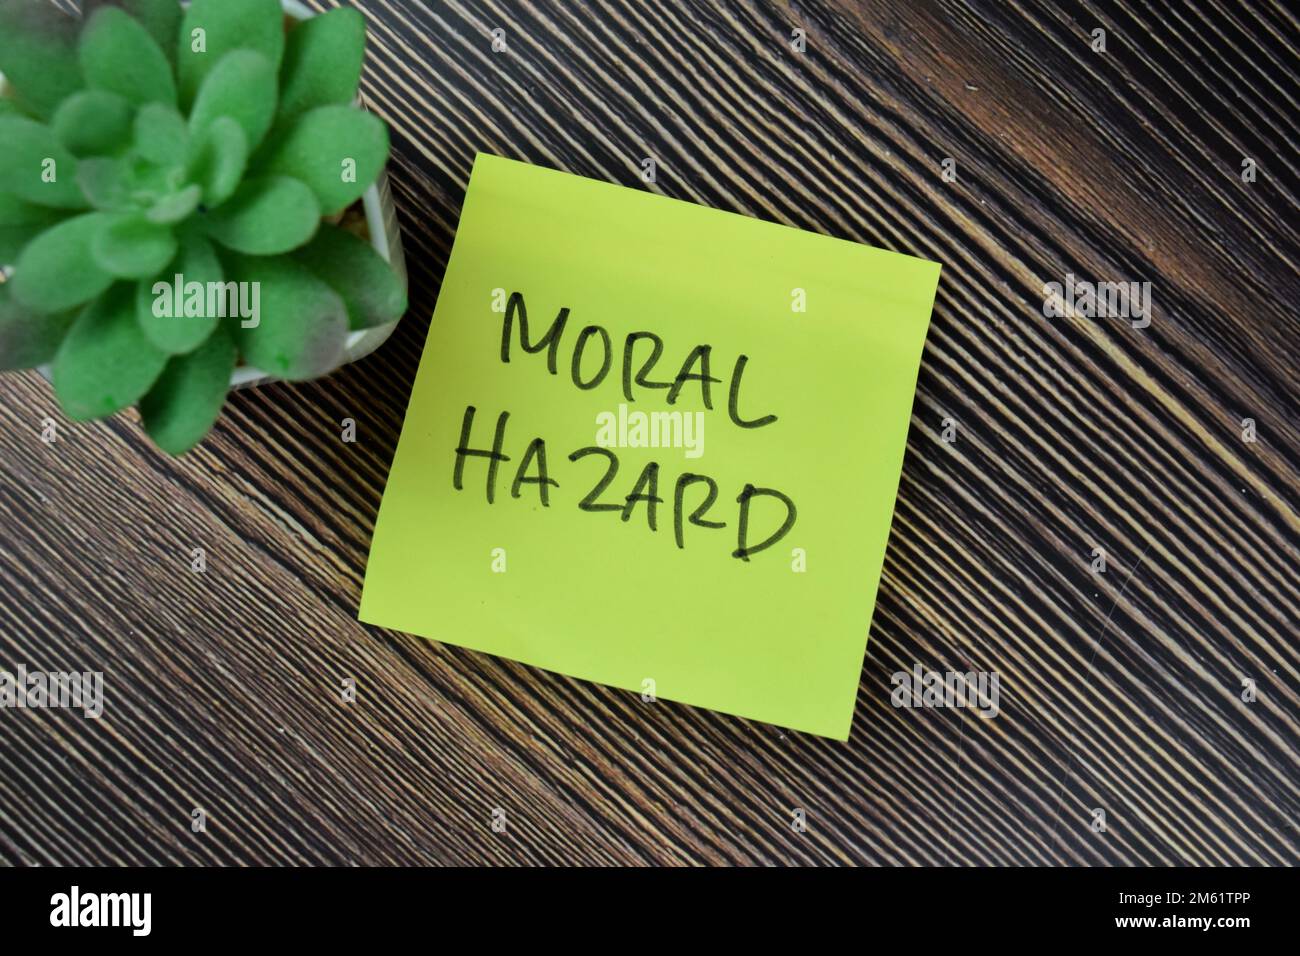 Concept of Moral Hazard write on sticky notes isolated on Wooden Table. Stock Photo